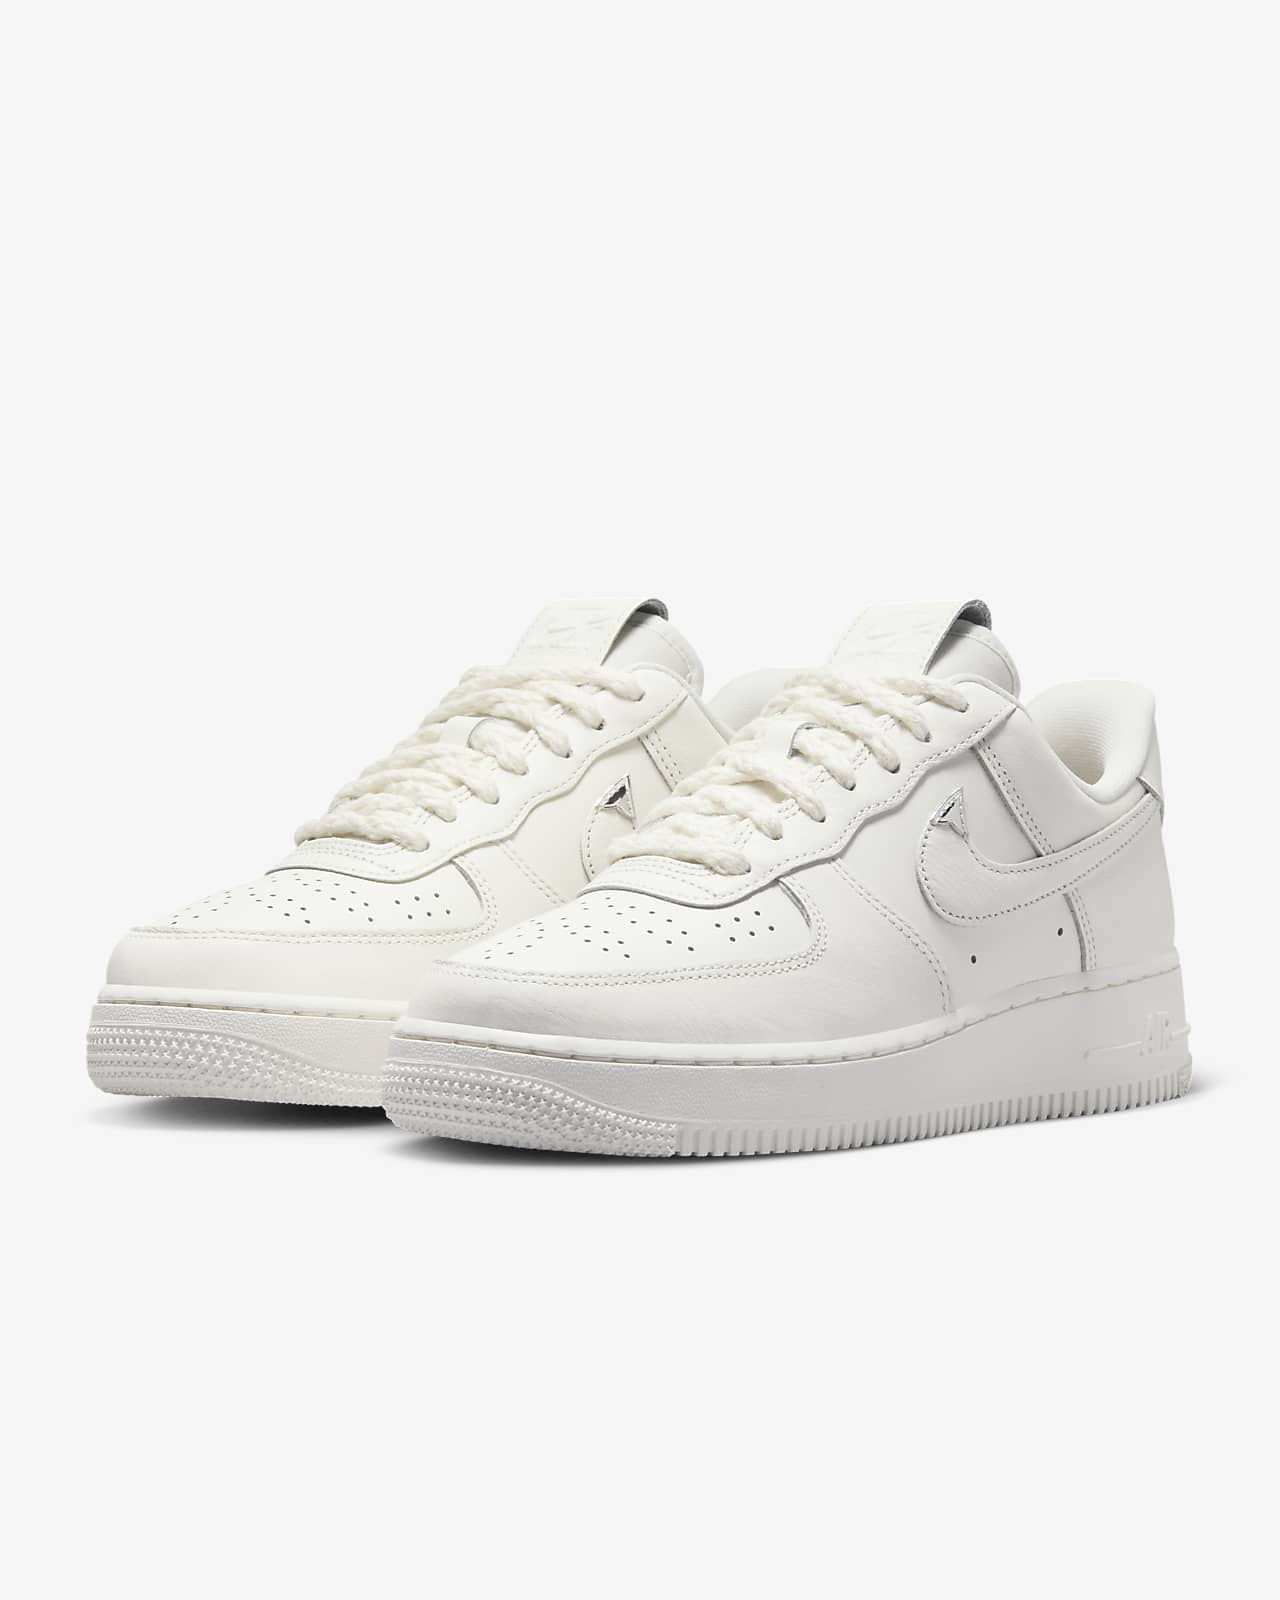 Nike Women's Air Force 1 '07 LV8 Shoes